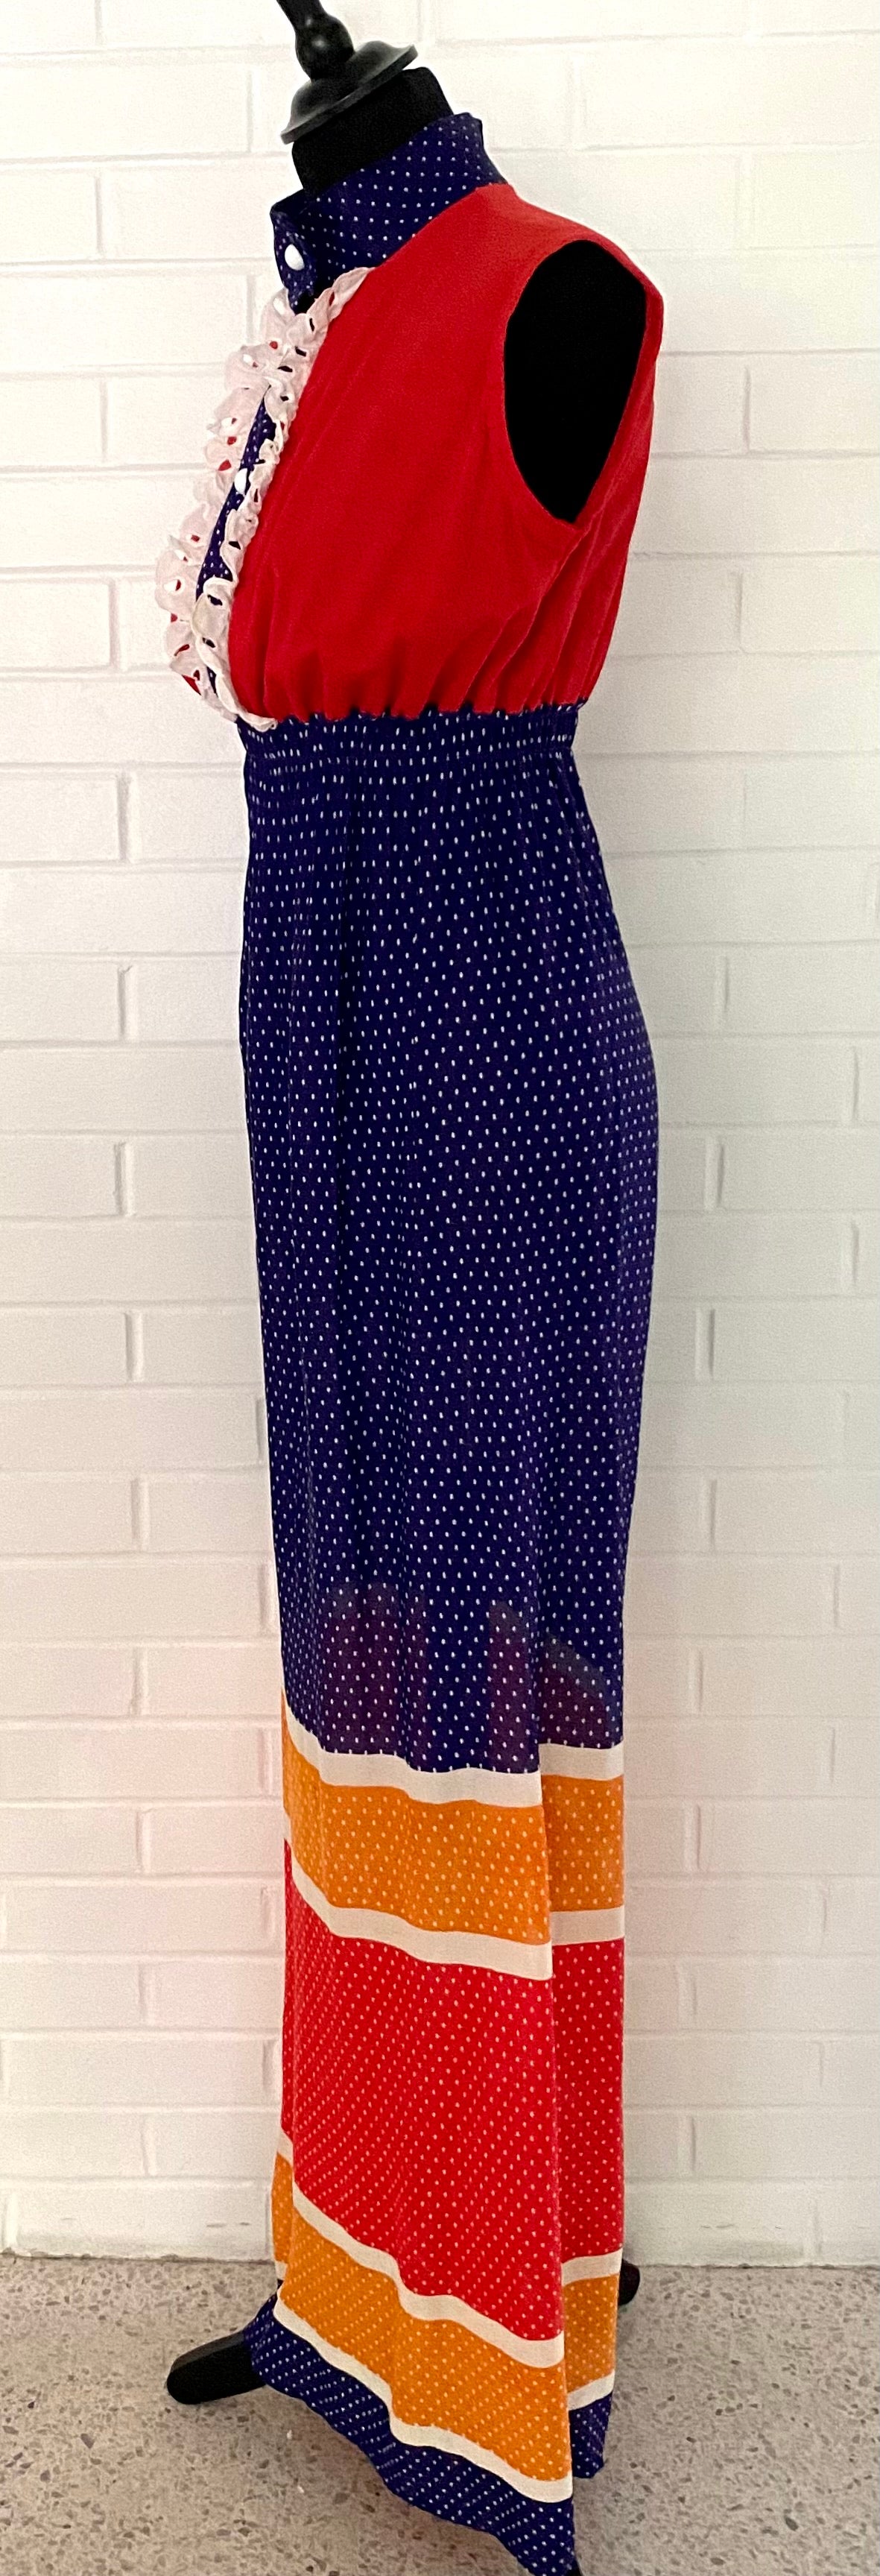 Late 60s/ Early 70s Maxi Dress